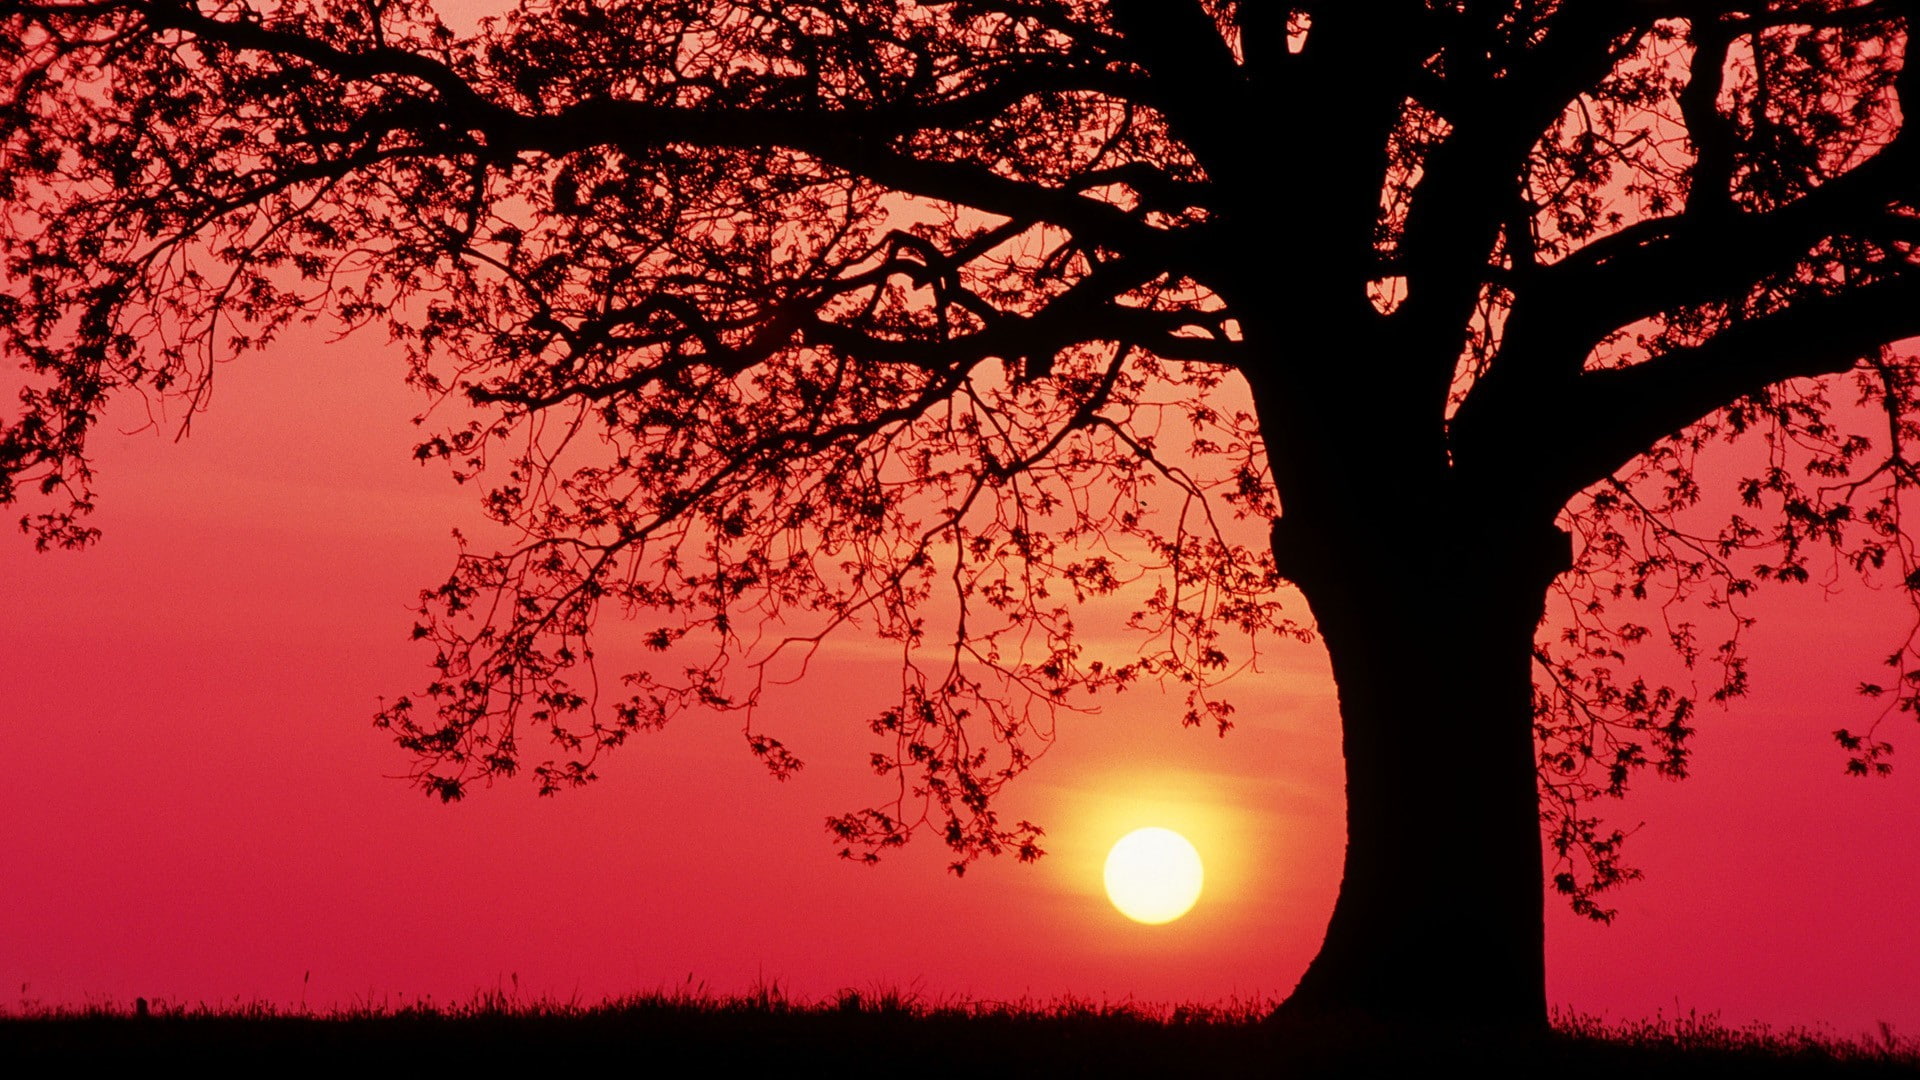 sunset, trees, grass, red sky